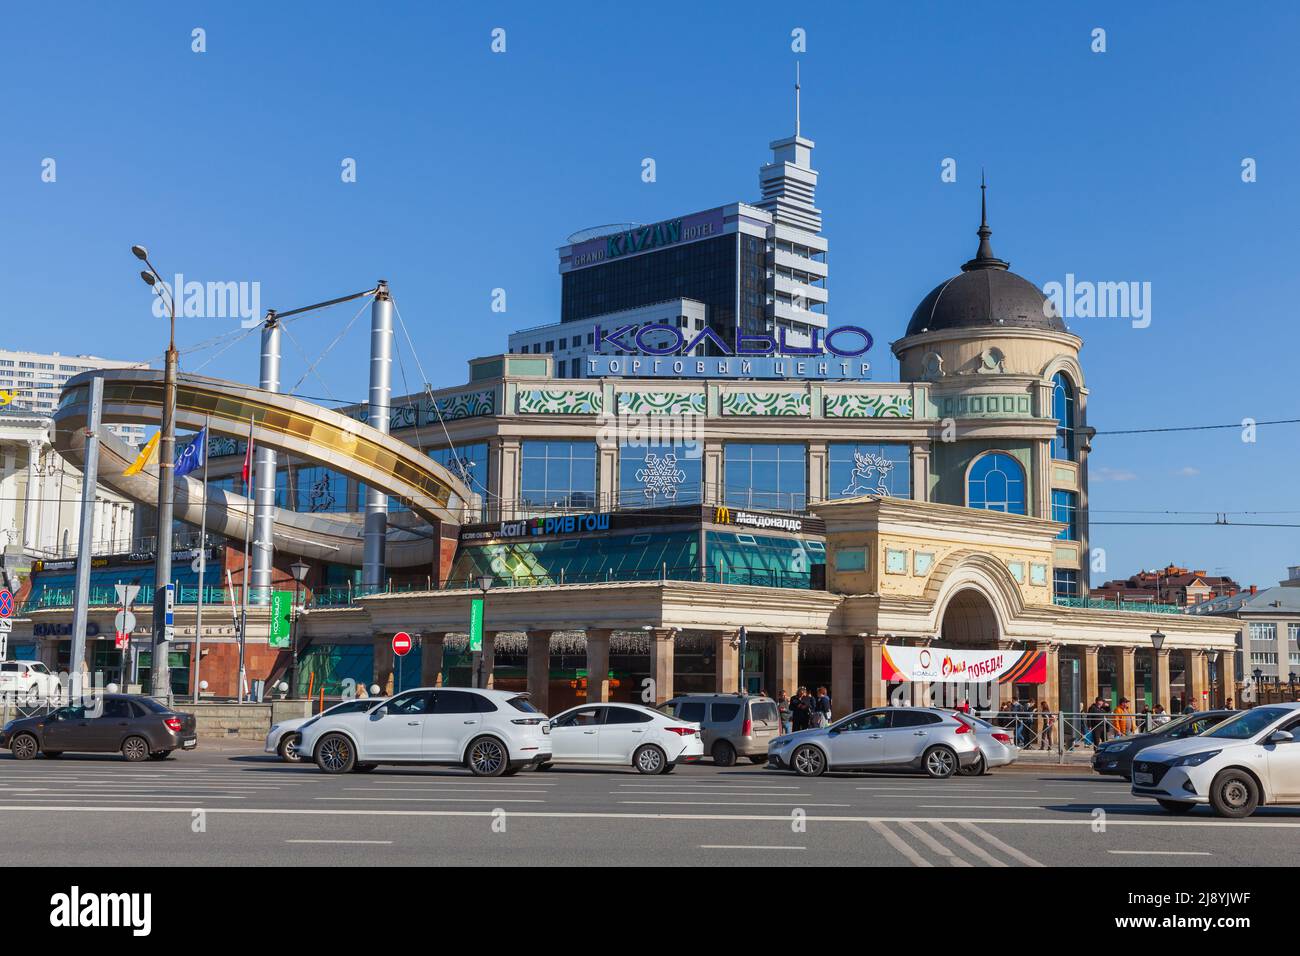 Kazan, Russia - May 7, 2022: Tukay Square view on a sunny day, the central square in the city of Kazan, the capital of Tatarstan. Ordinary people walk Stock Photo